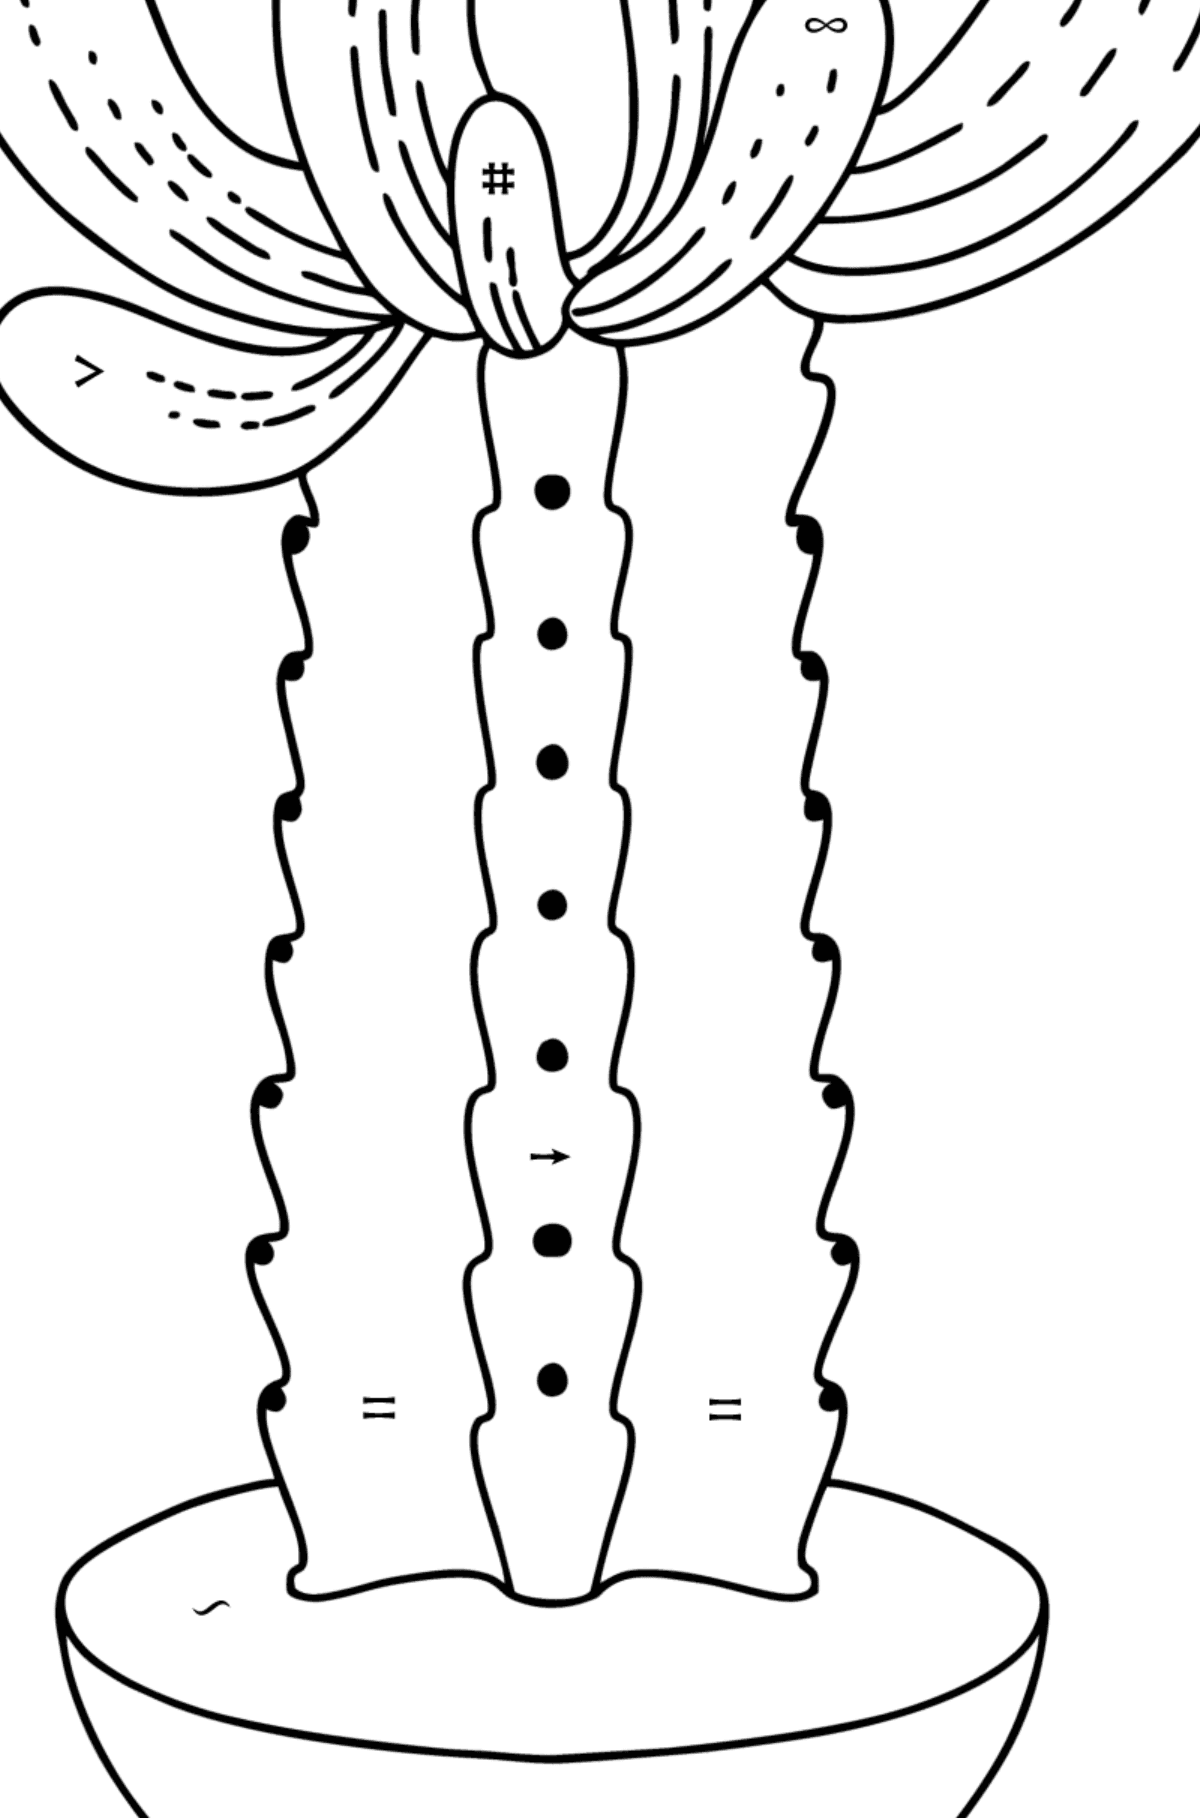 Simple cactus coloring page - Coloring by Symbols for Kids